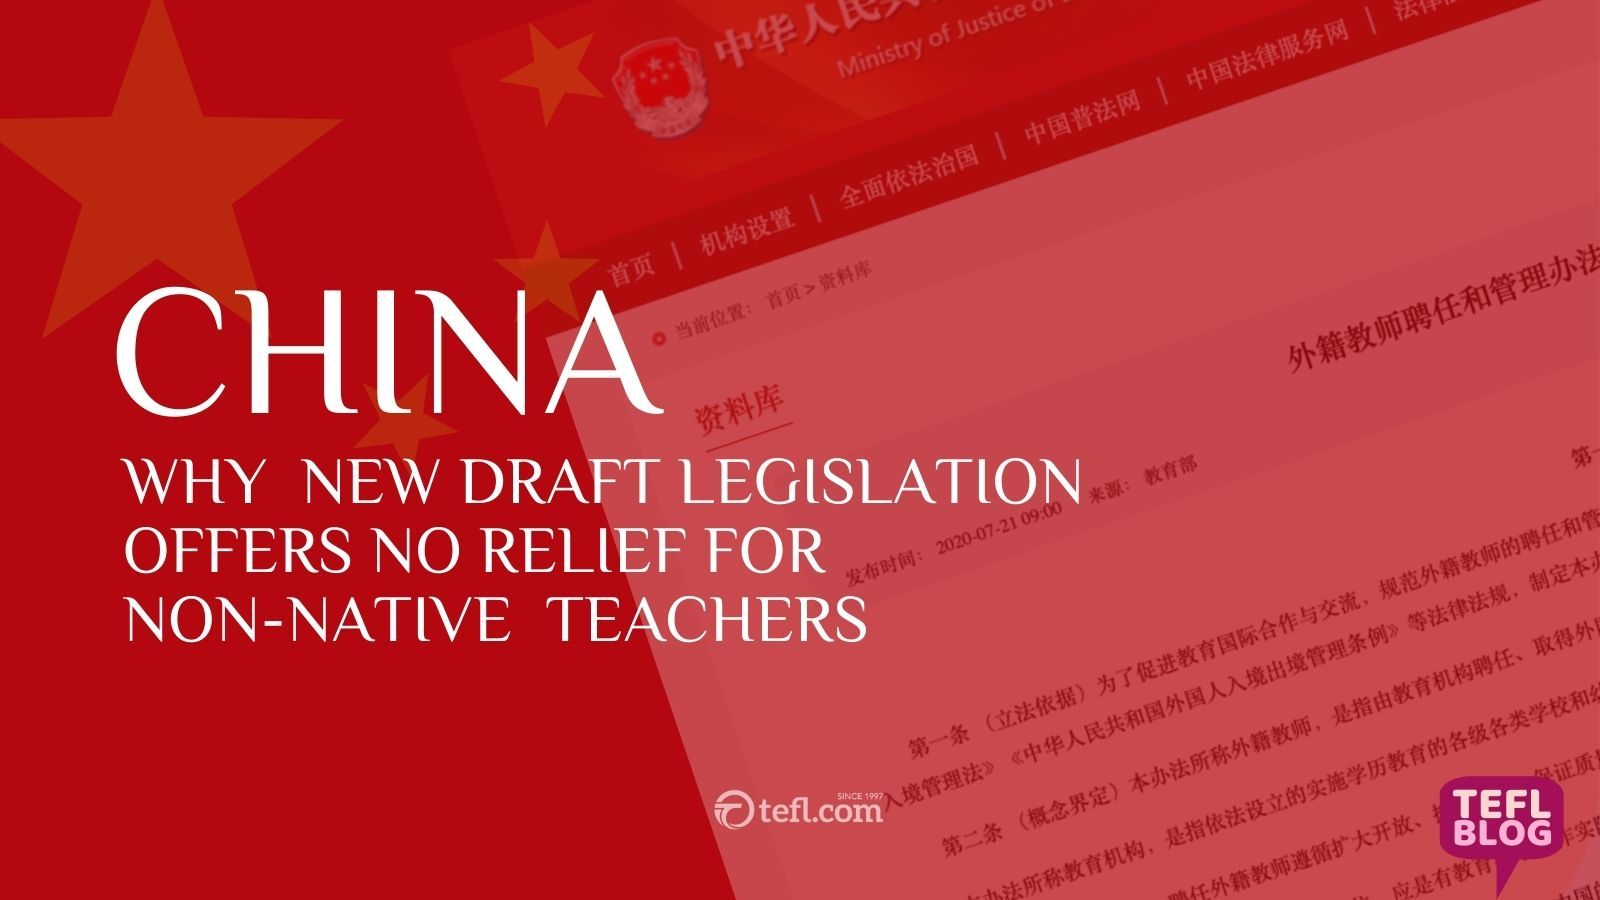 China: Why new draft legislation offers no relief for non-native teachers